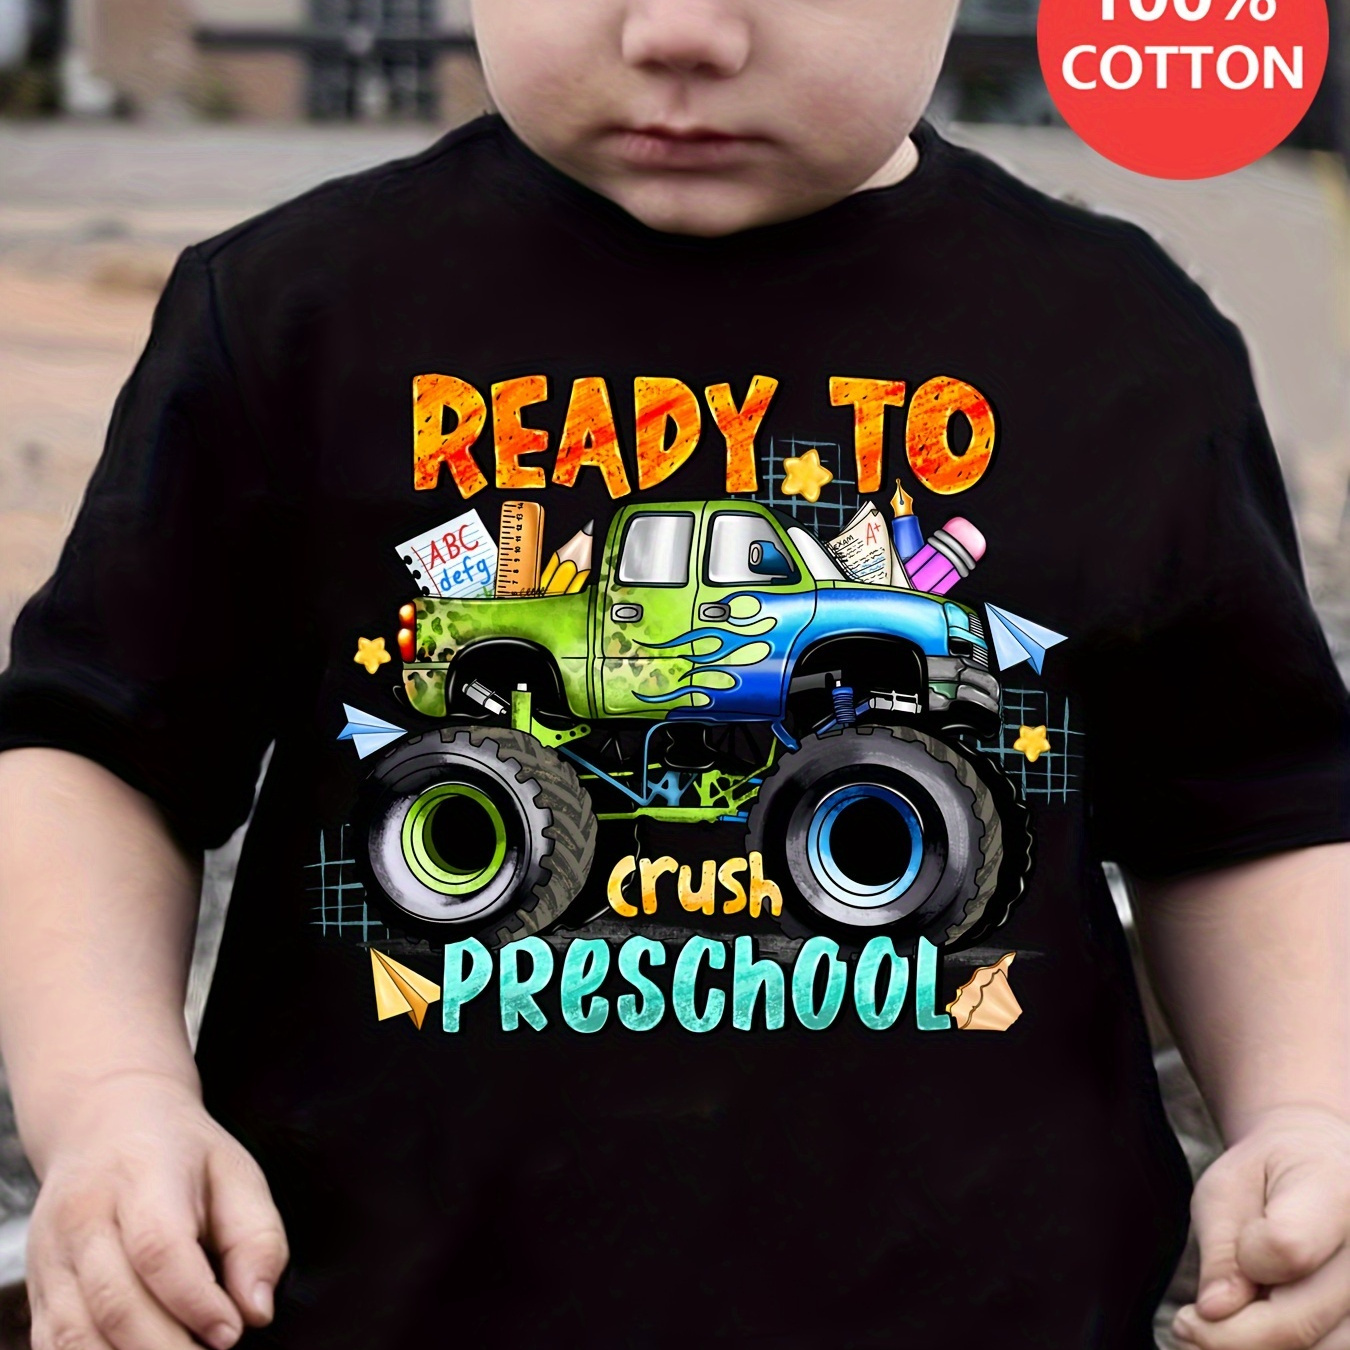 

Boy's Pure Cotton Summer Casual Comfy T-shirt - Ready To Crush School.. & Truck Print Short Sleeve Crew Neck Tee Creative Gift